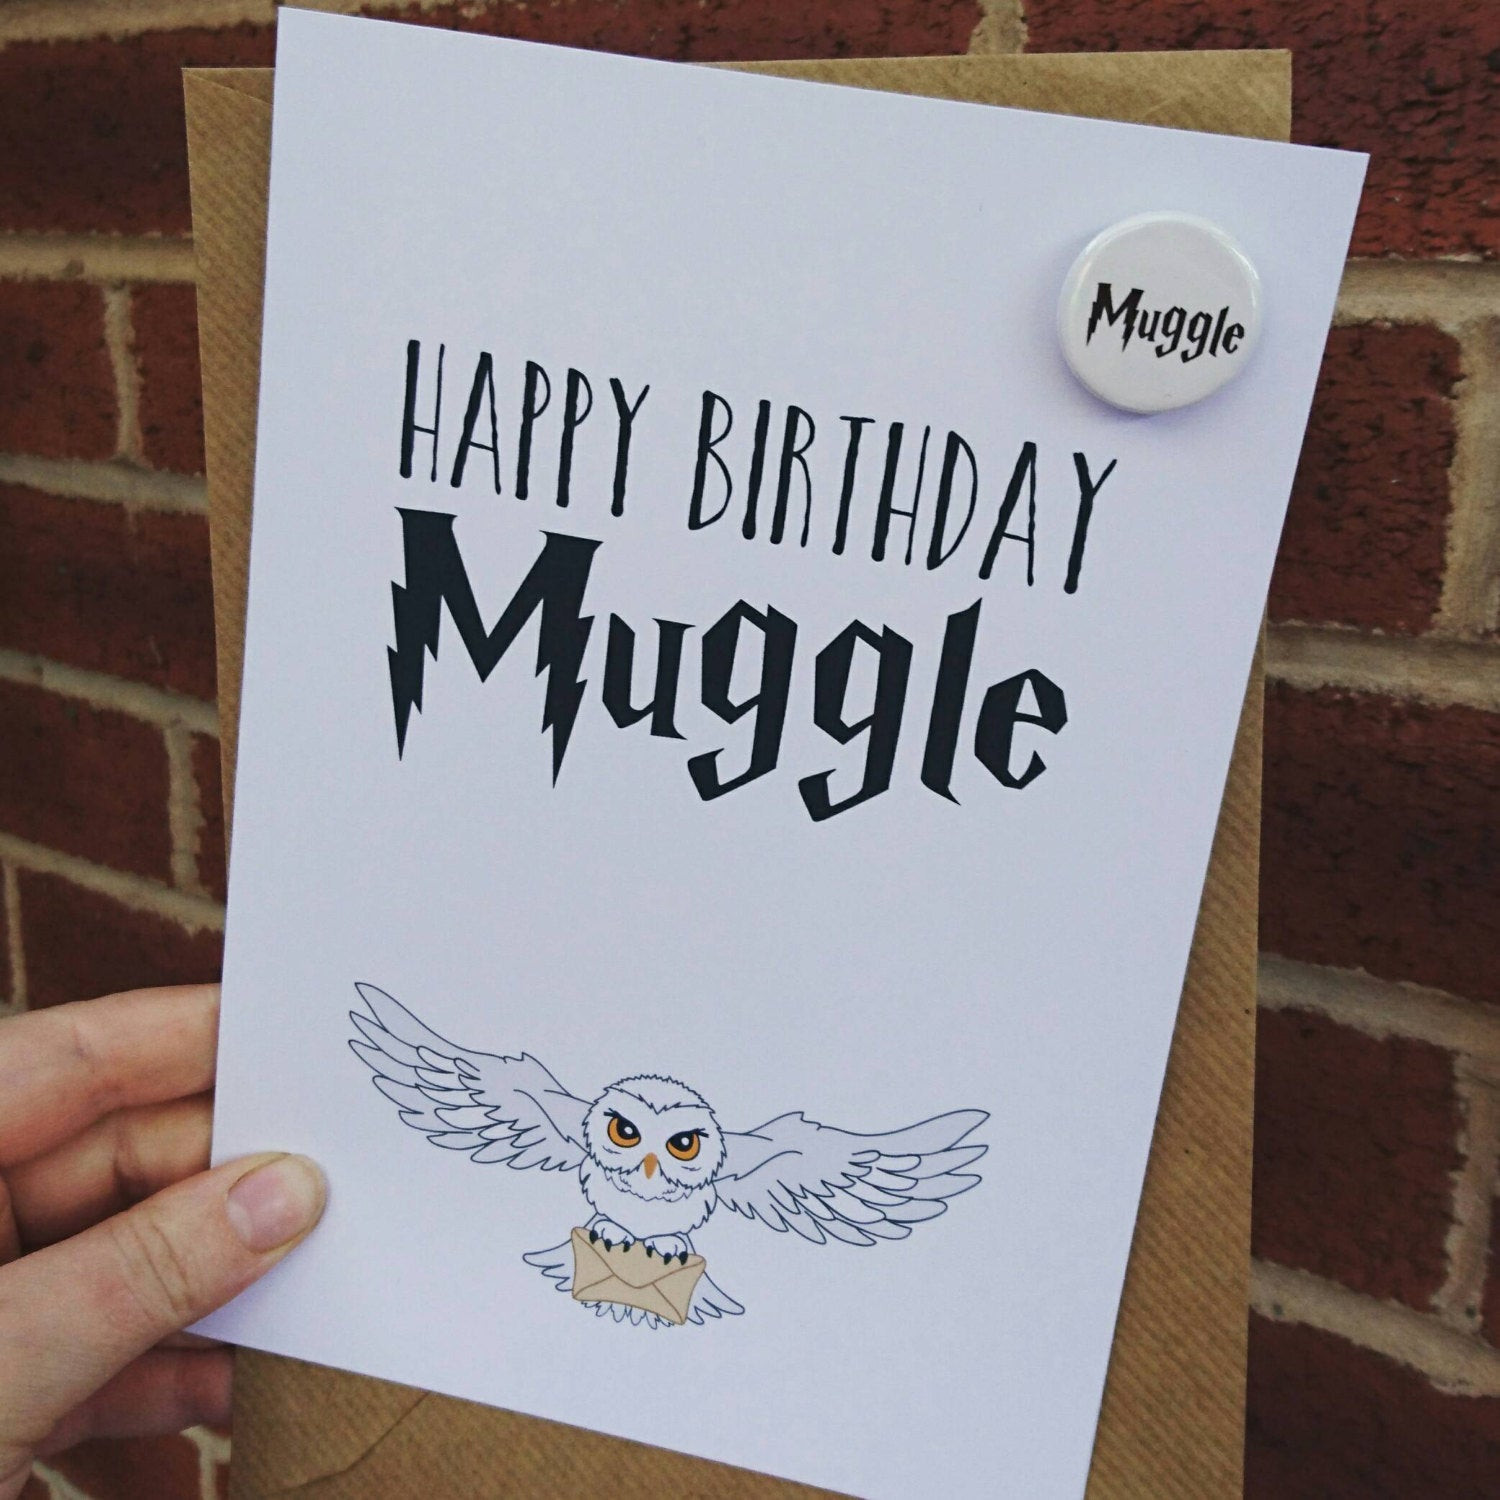 Harry Potter Birthday Card
 Harry Potter fan themed birthday card with Muggle badge